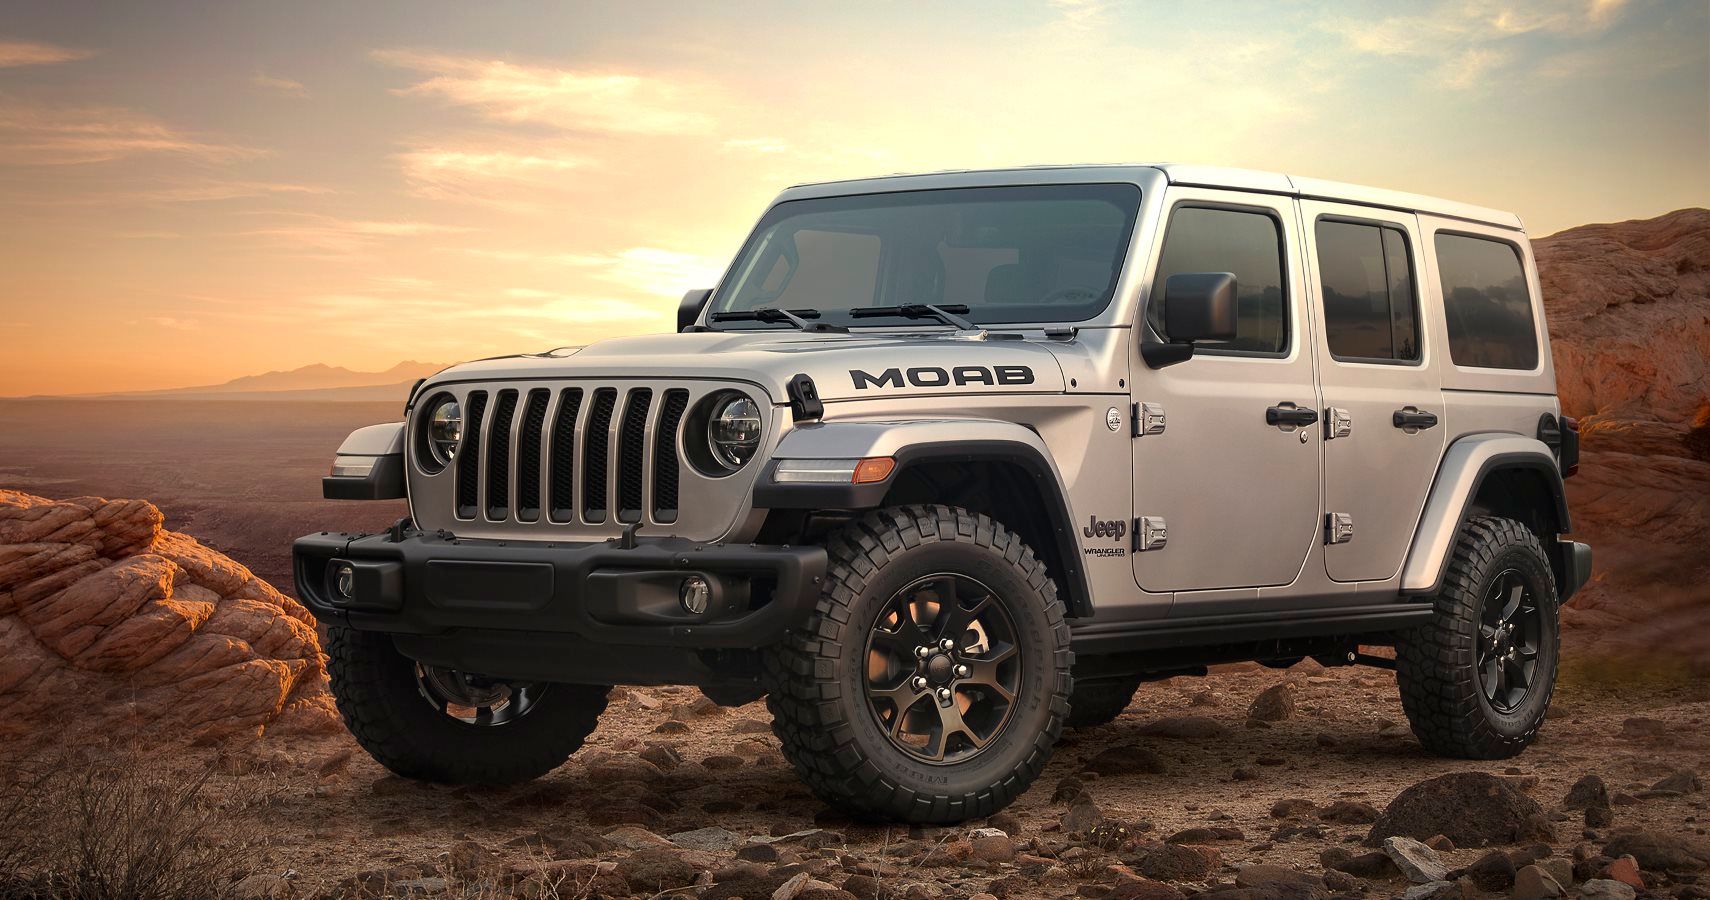 Check Out The 2018 Jeep Wrangler Moab Edition